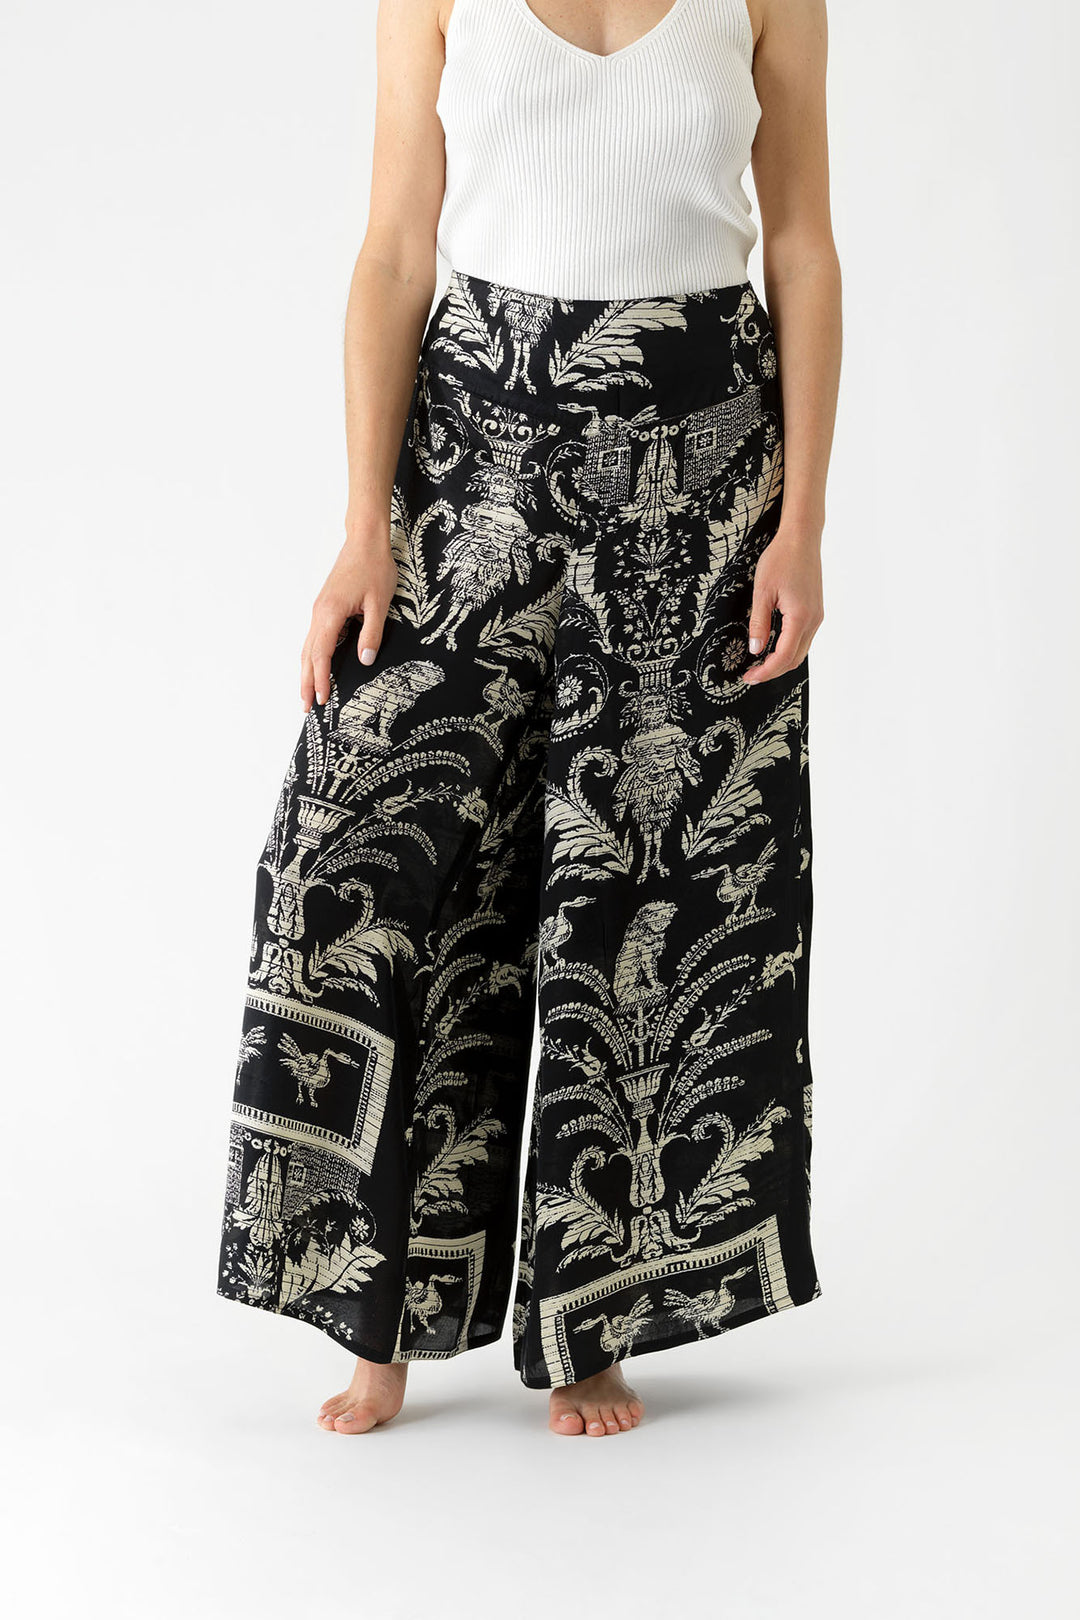 ladies palazzo pant in satin in black and white vintage damask print by One Hundred Stars